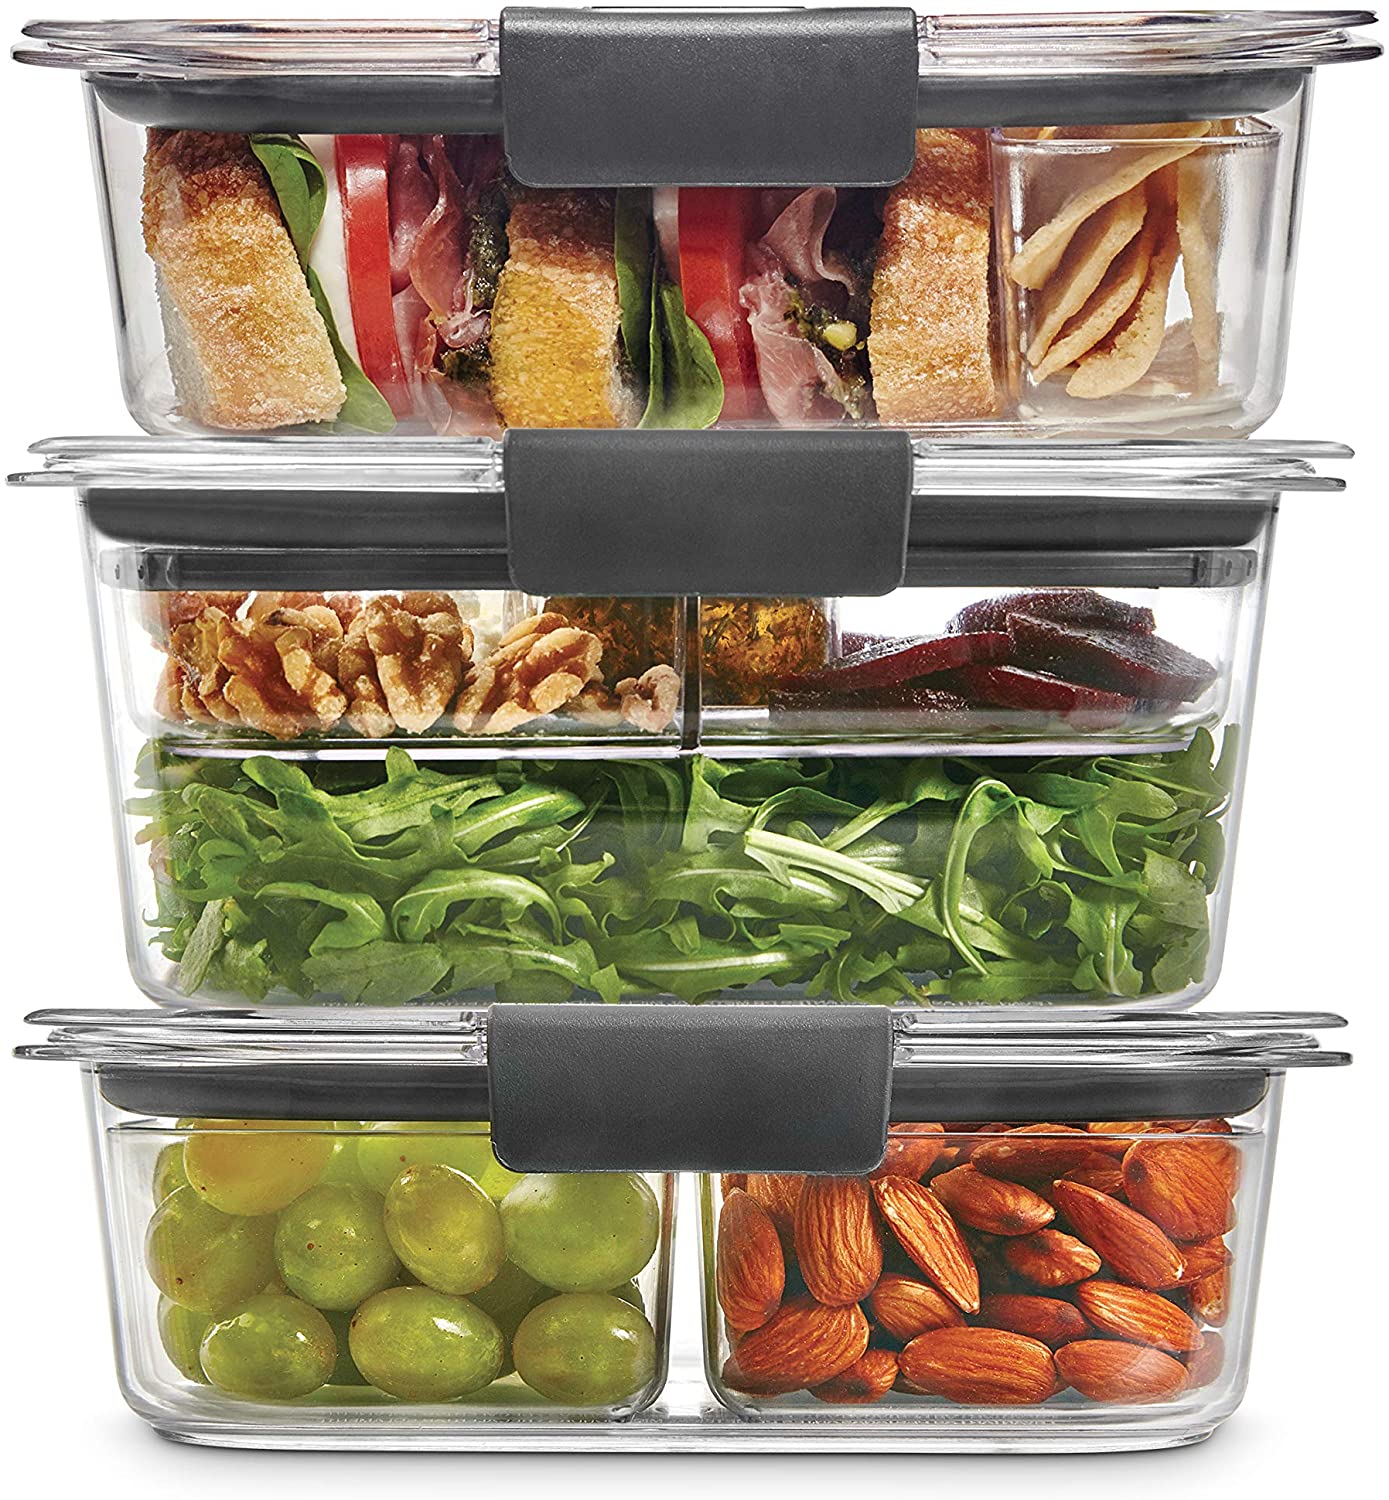 Leak-Proof Brilliance Food Storage 12-Piece Plastic Containers with Lids Bento Box Style Sandwich and Salad Lunch Kit